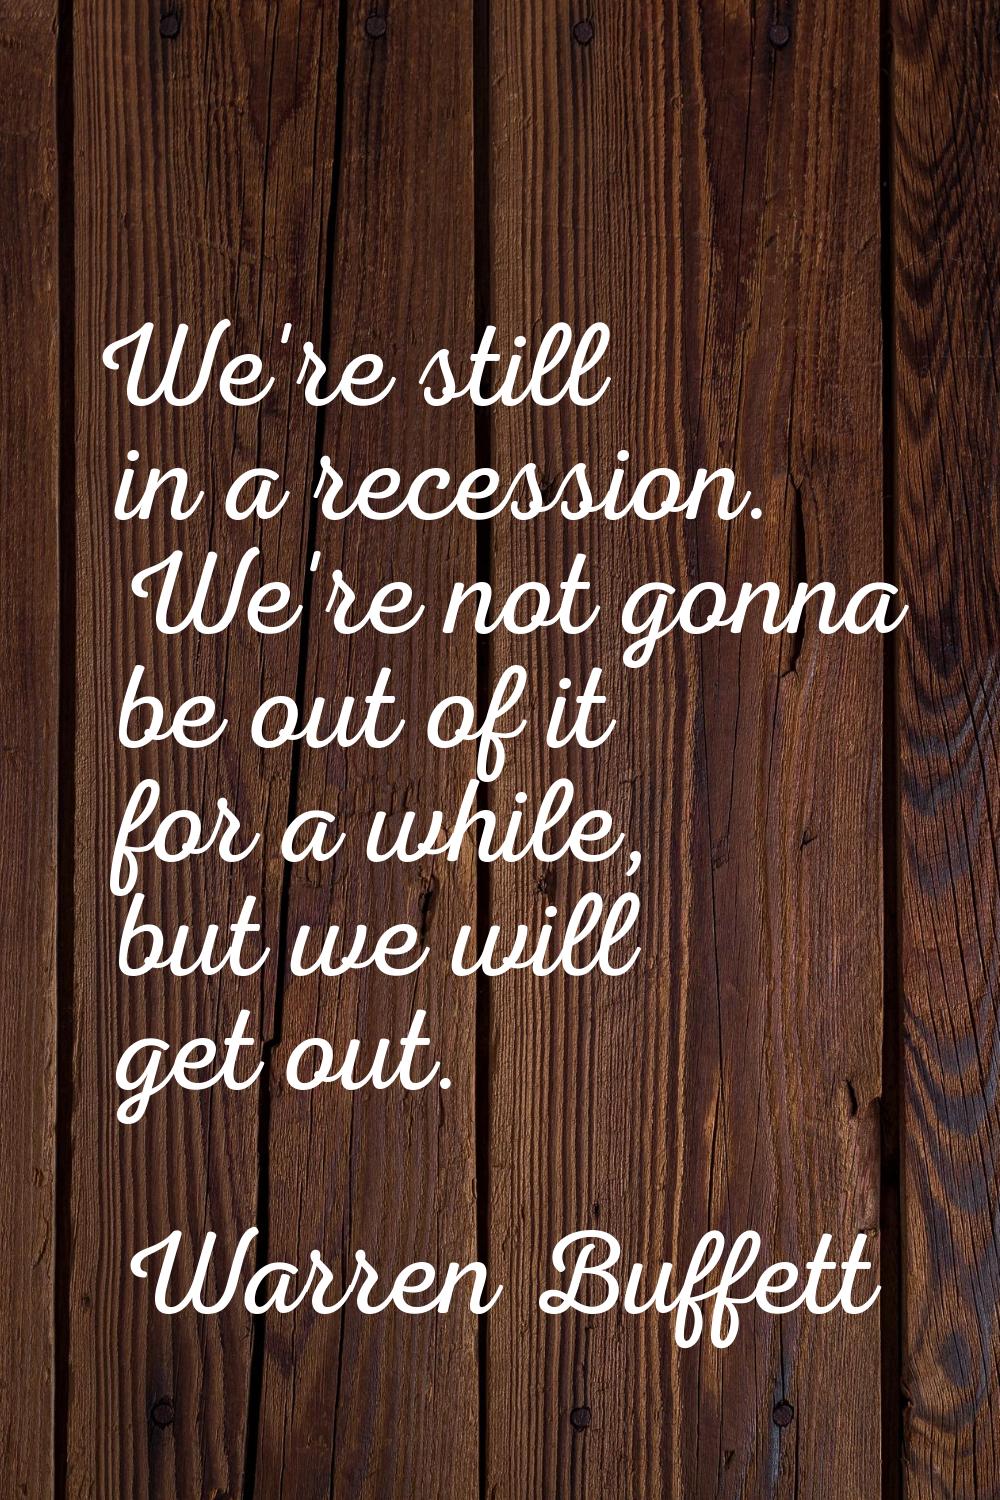 We're still in a recession. We're not gonna be out of it for a while, but we will get out.